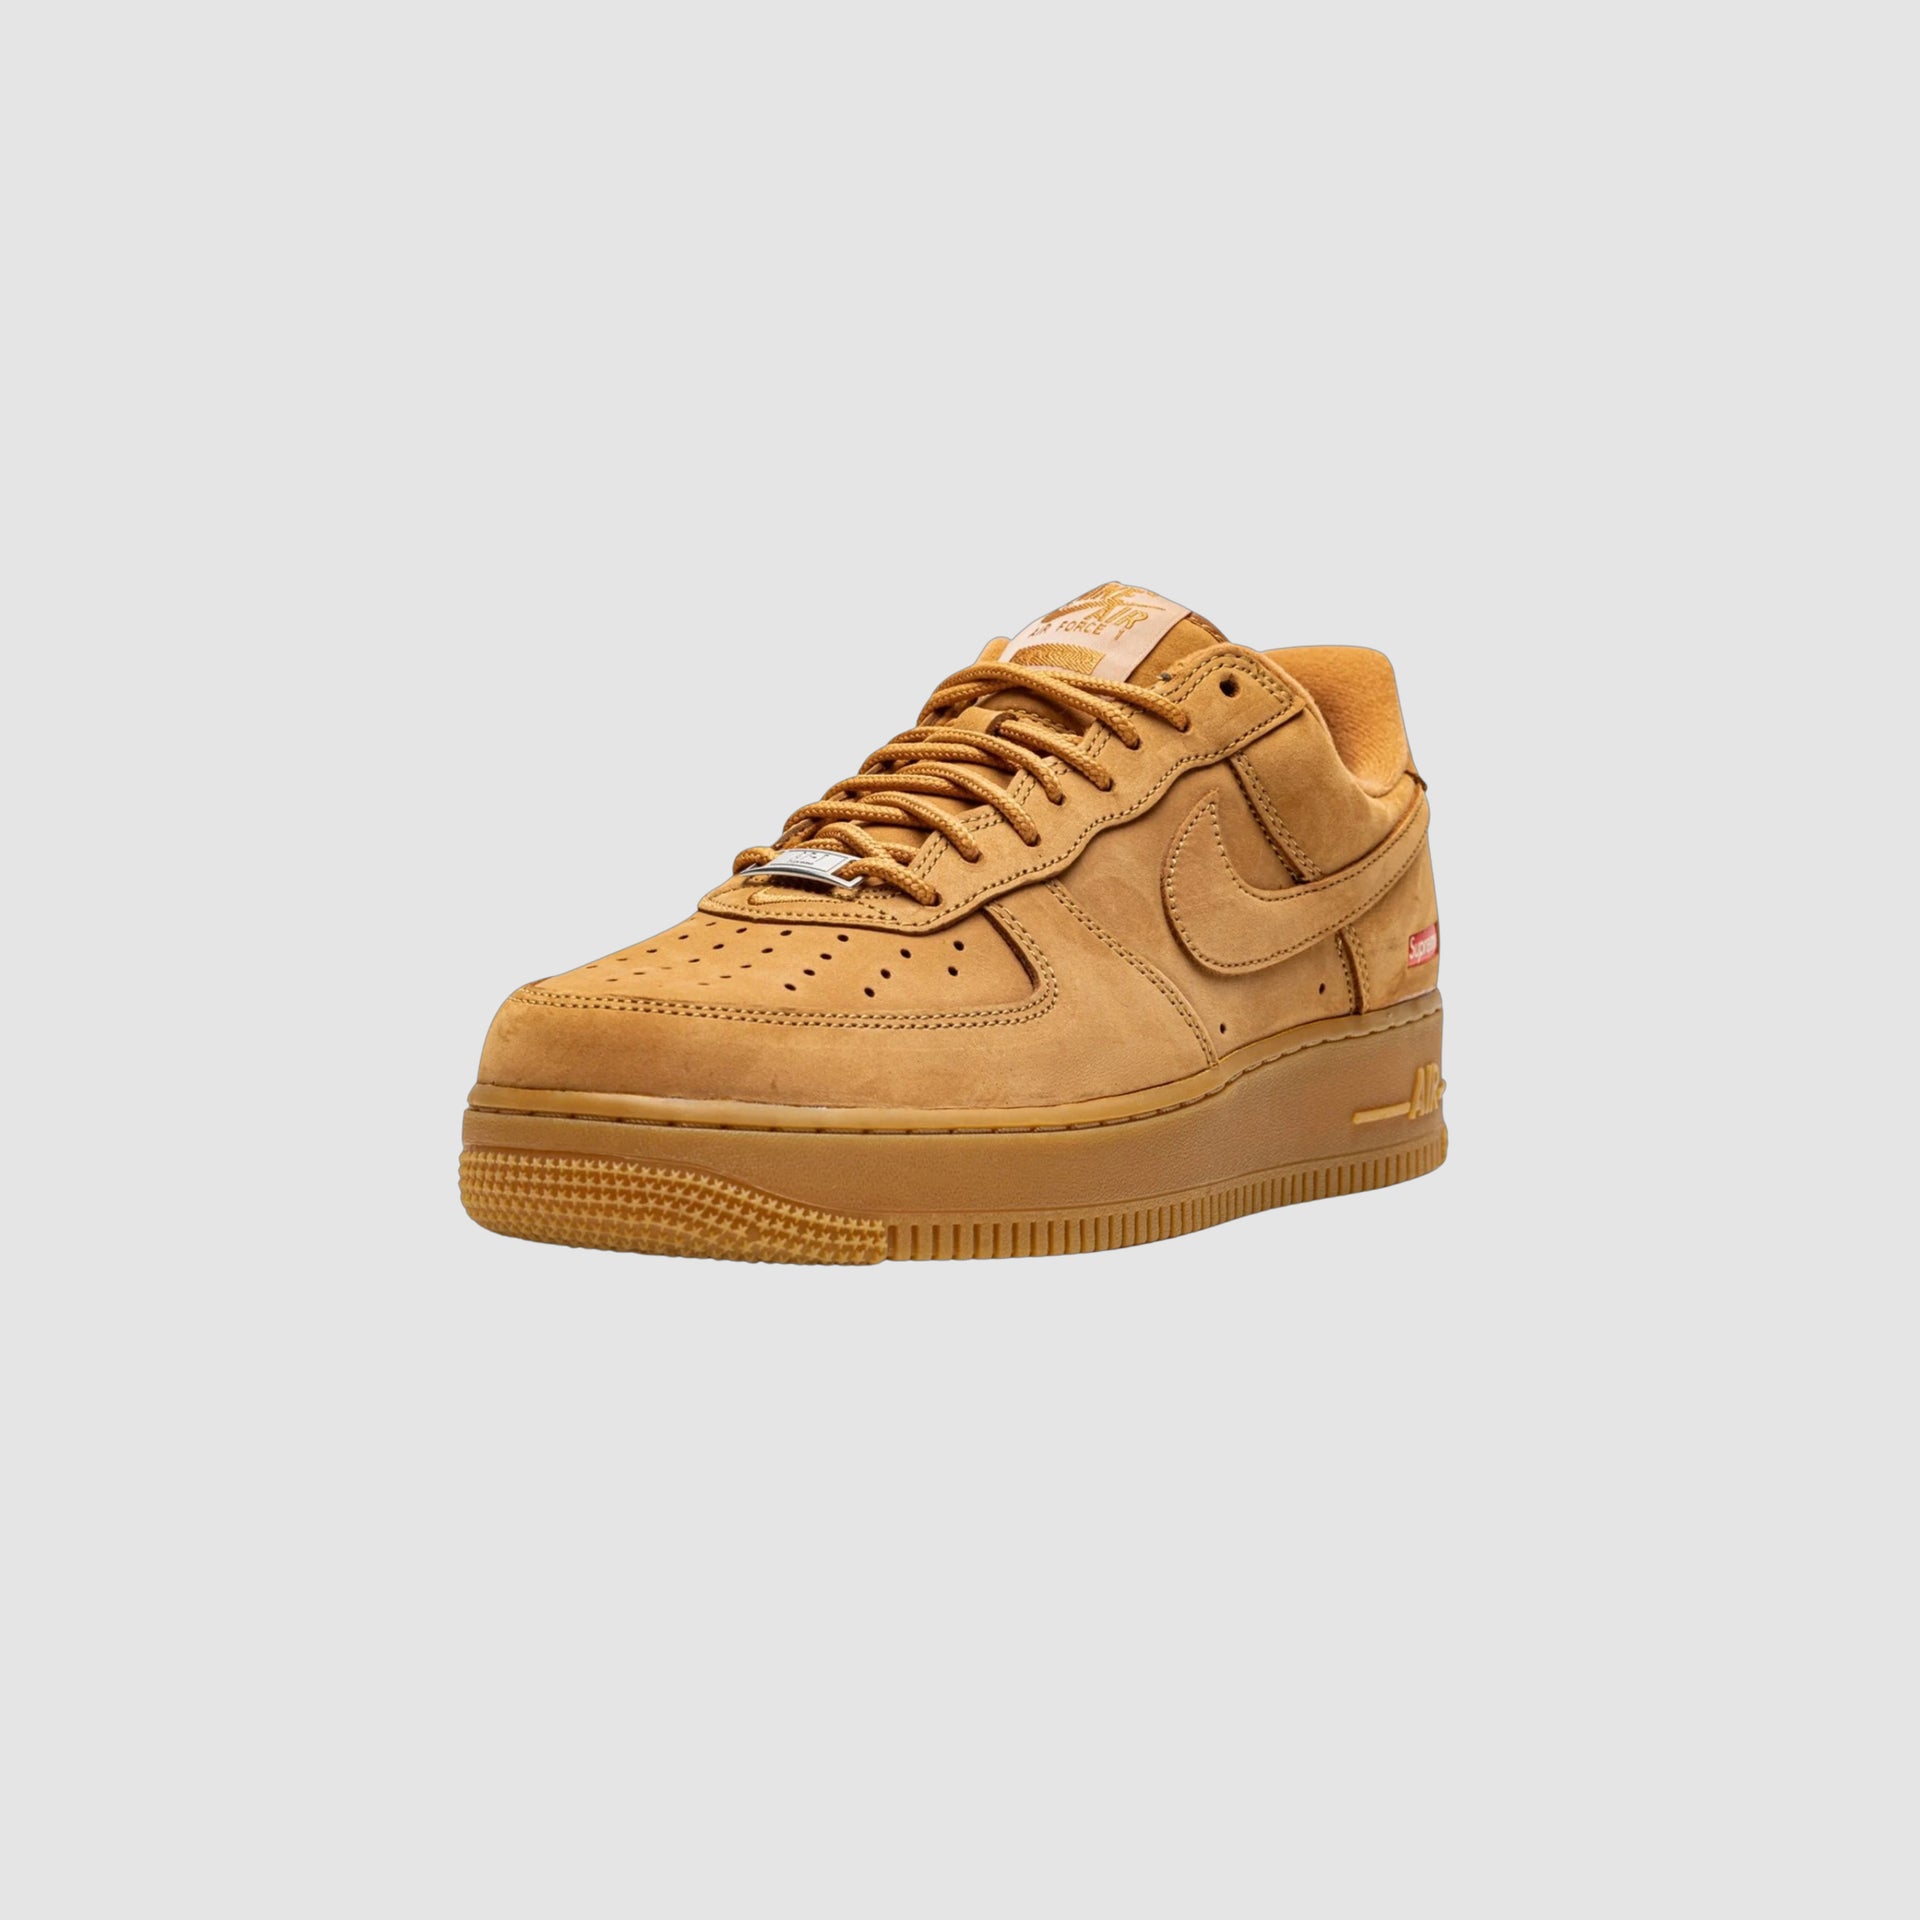 AIR FORCE 1 LOW SP "Supreme - Wheat"